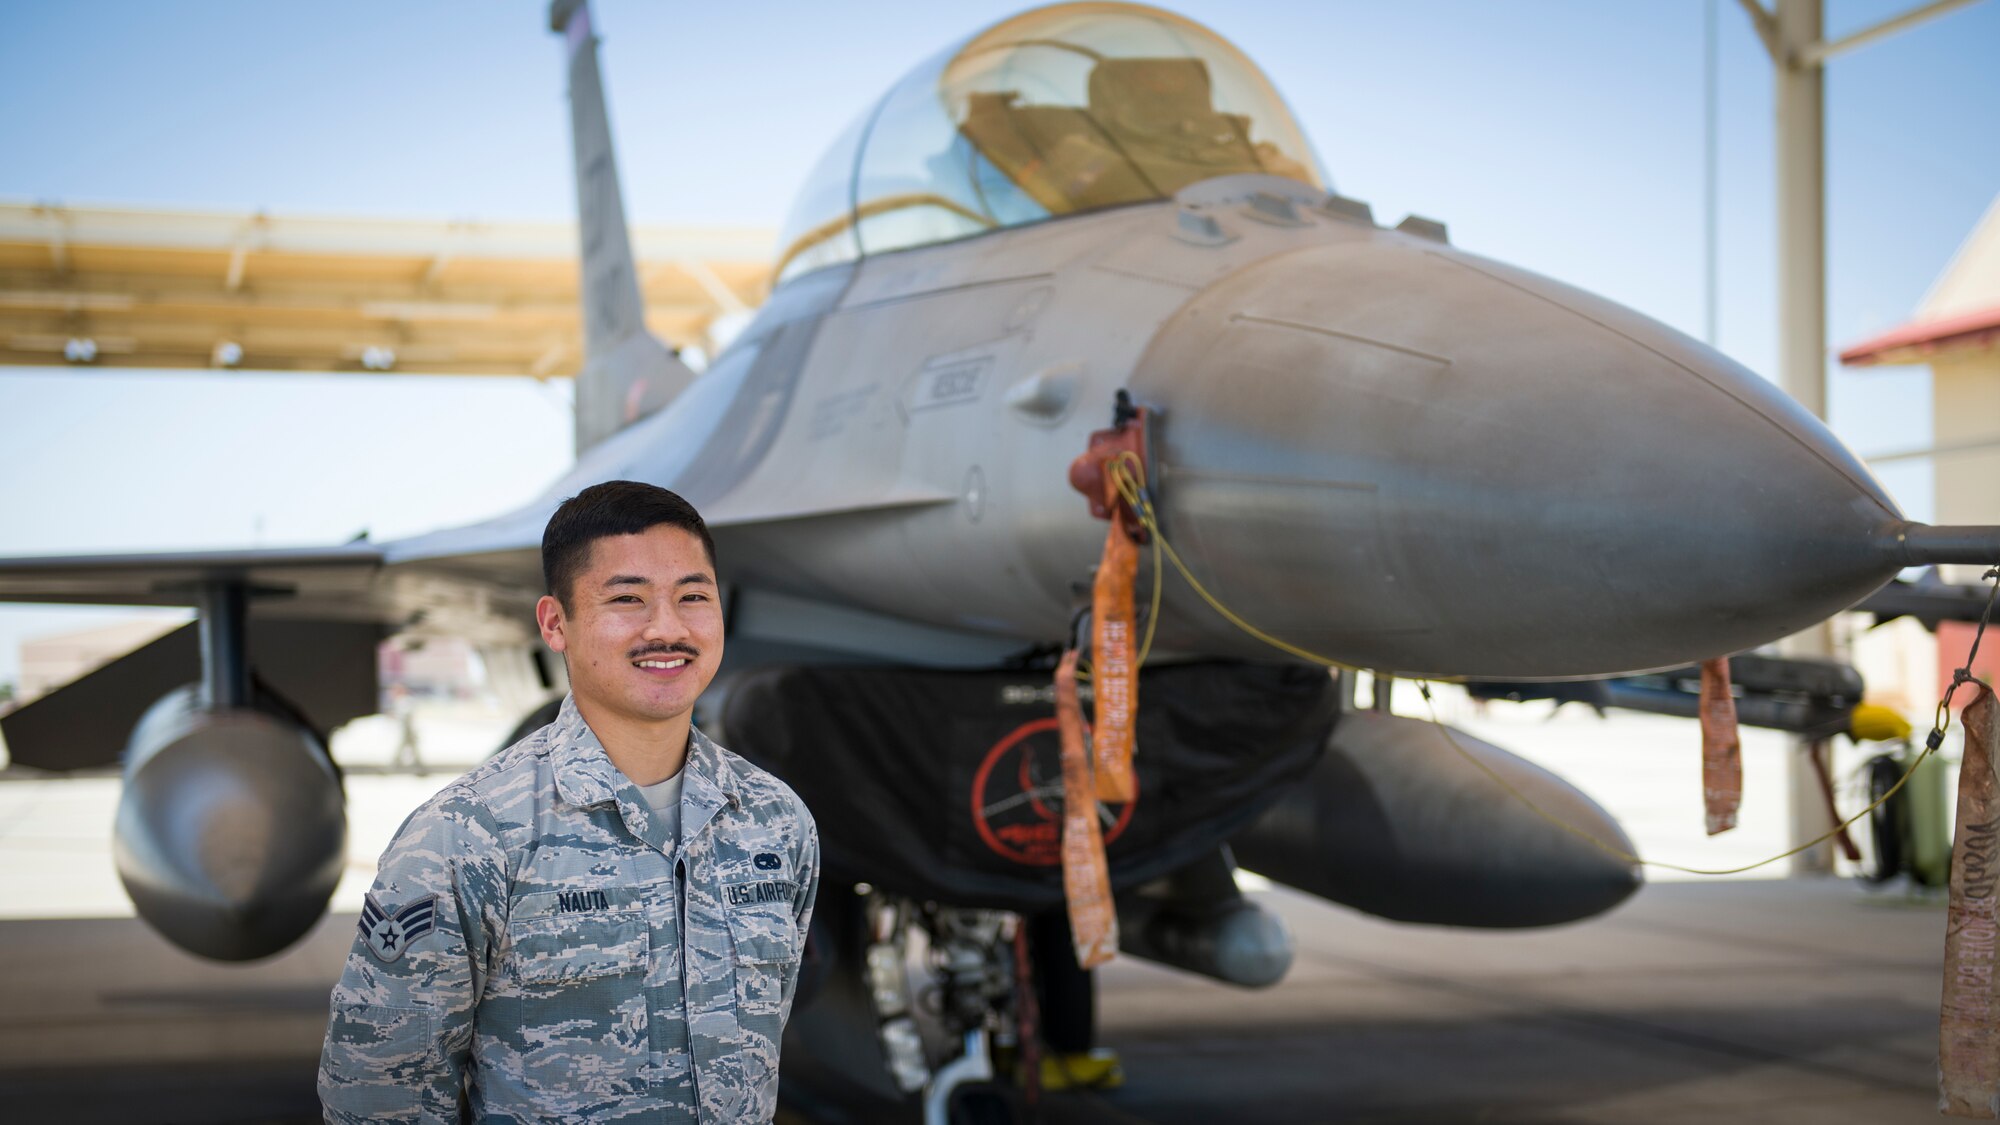 Senior Airman Nathan Nauta, electrical and environmental technician assigned to the 926th Maintenance Support Squadron, Nellis Air Force Base, Nevada, poses for a photo in front of an F-16 Fighting Falcon at Edwards Air Force Base, California, July 24. (Air Force photo by Giancarlo Casem)